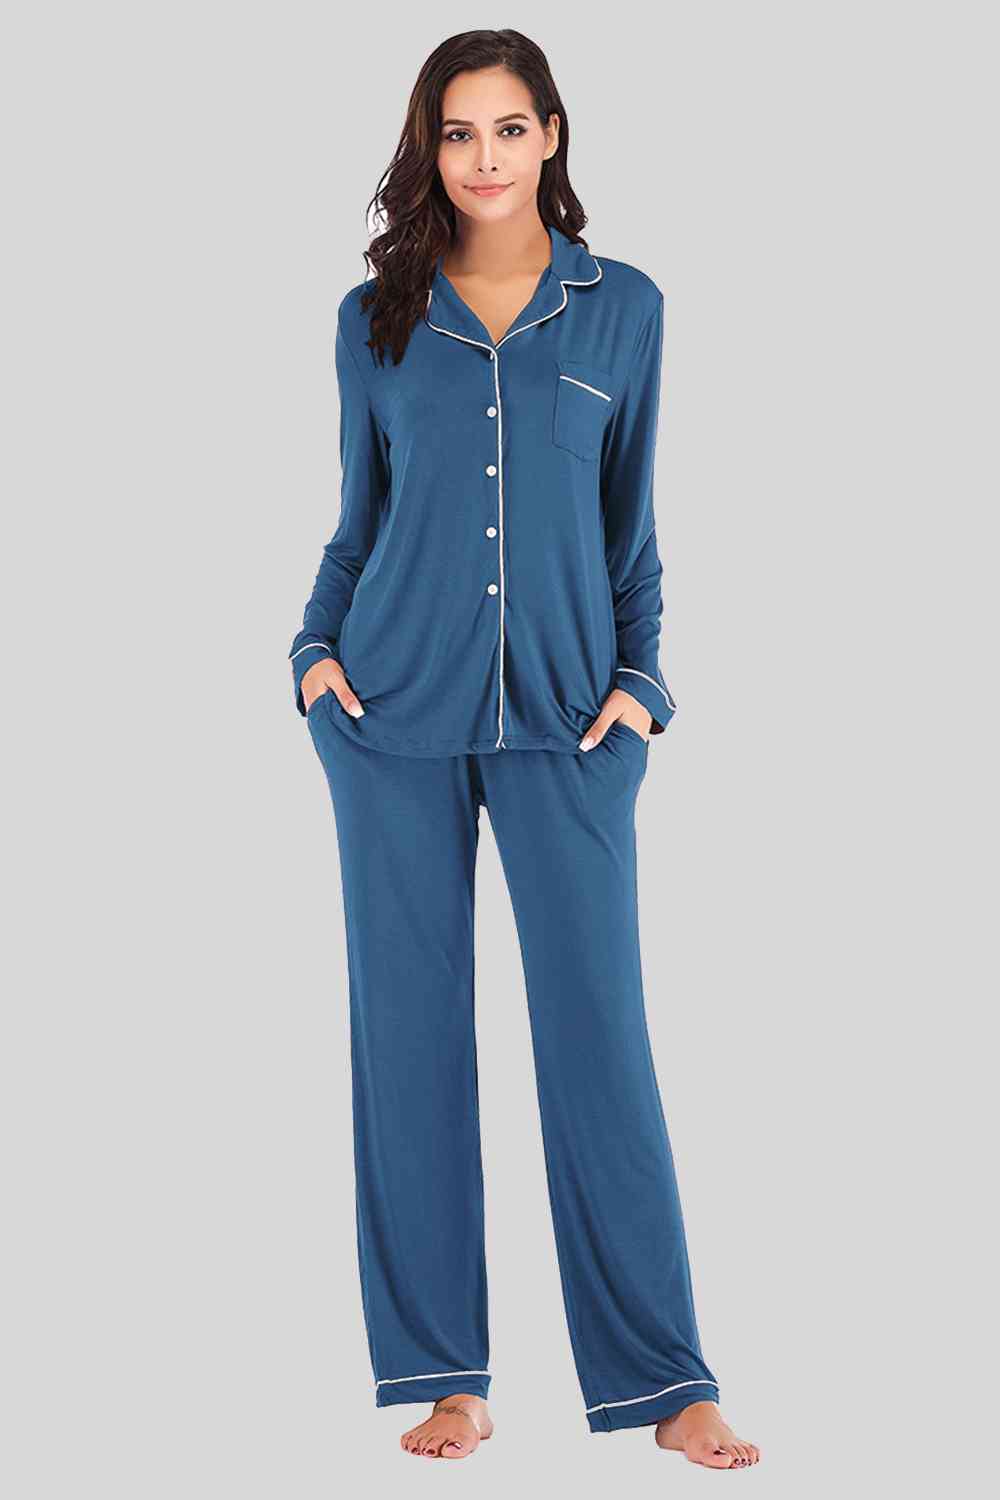 Collared Neck Long Sleeve Loungewear Set with Pockets Peacock Blue